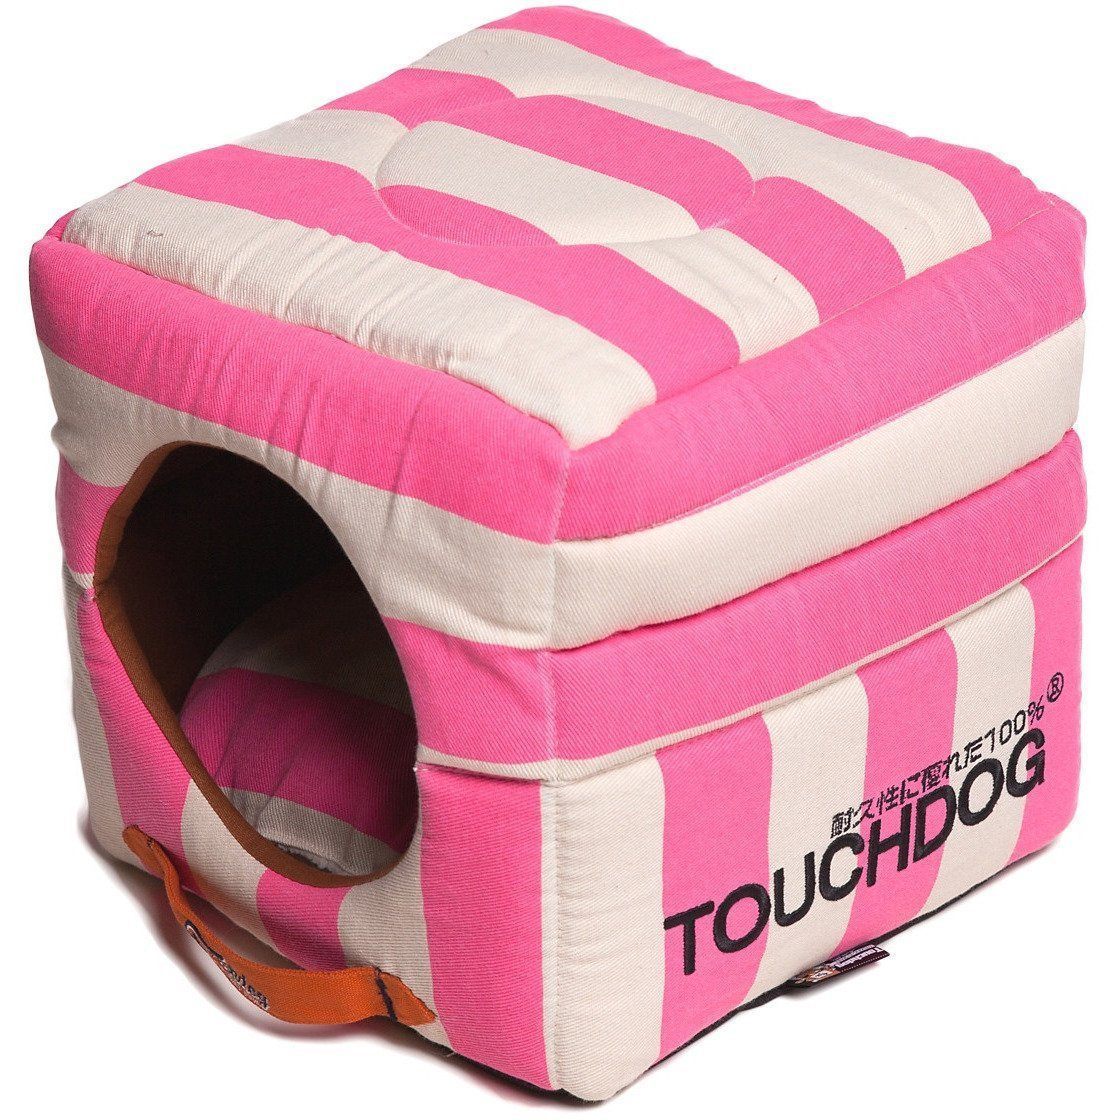 Touchdog ® 'Polo-Striped' 2-in-1 Convertible and Collapsible Dog and Cat Bed Pink, White 